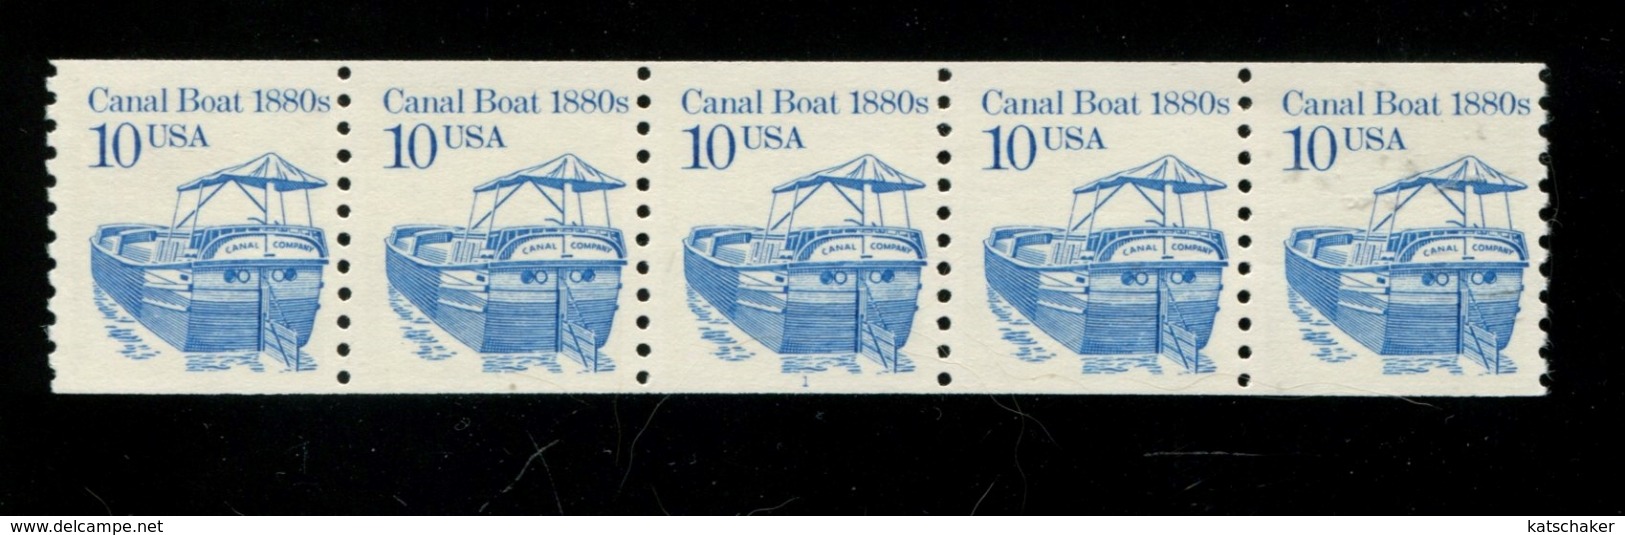 450369210 1987 (XX) SCOTT 2257 POSTFRIS MINTNEVER HINGED - TRANSPORTATION CANAL BOAT 1880S - PLATE 1 - Coils (Plate Numbers)